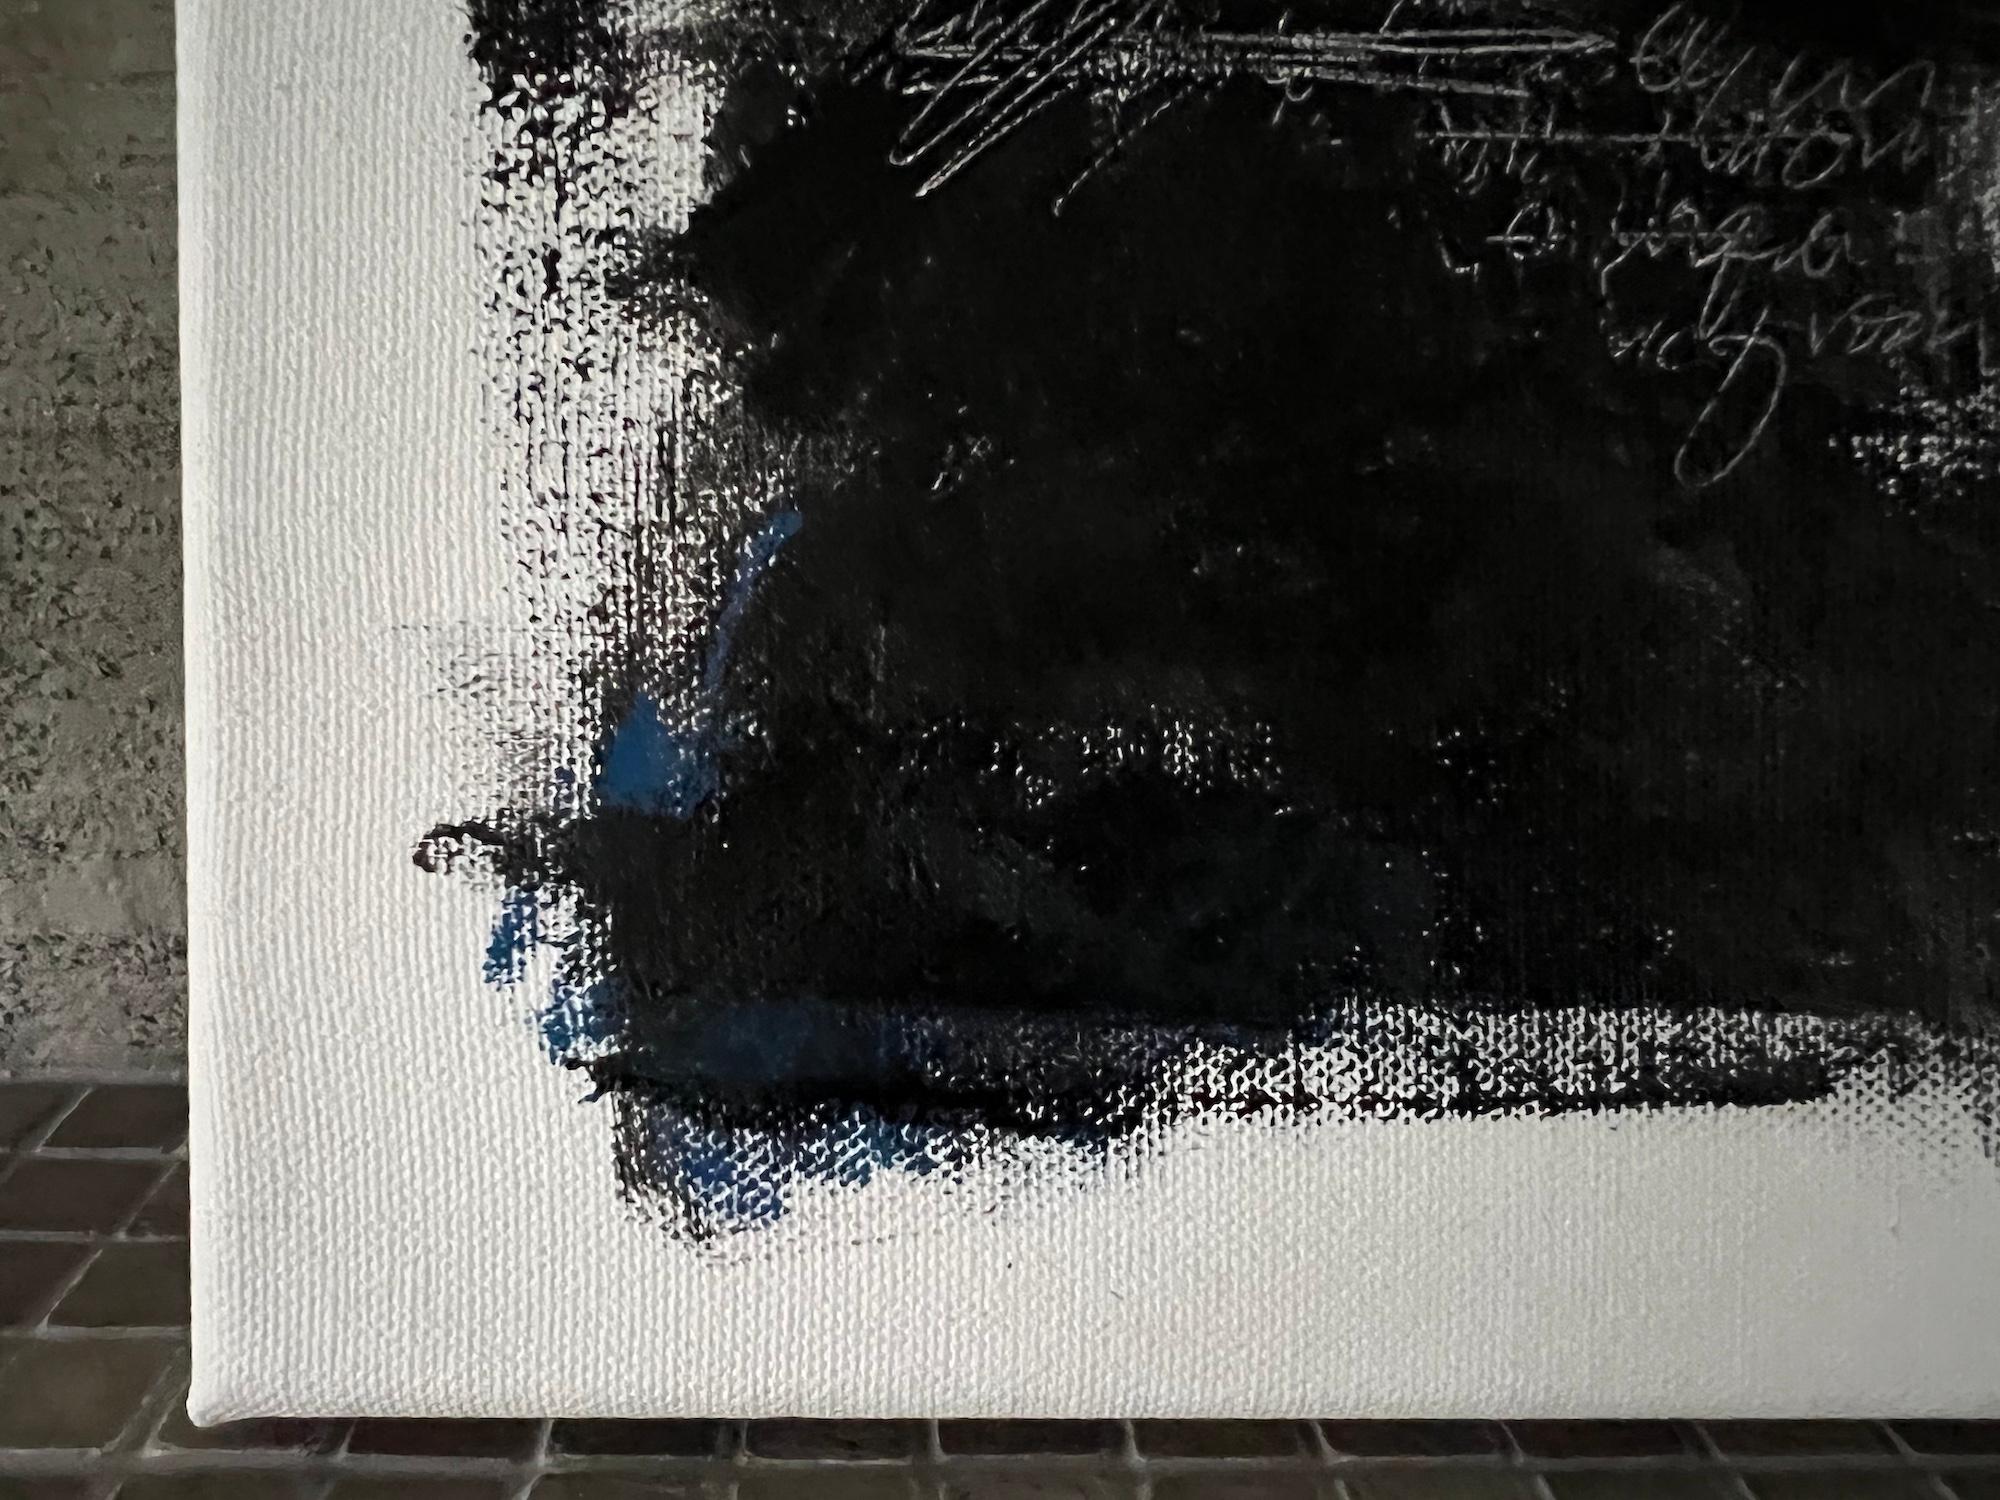 A Note To Myself - 1 (black and white abstract painting) - Contemporary Art by Andrea Stajan-Ferkul